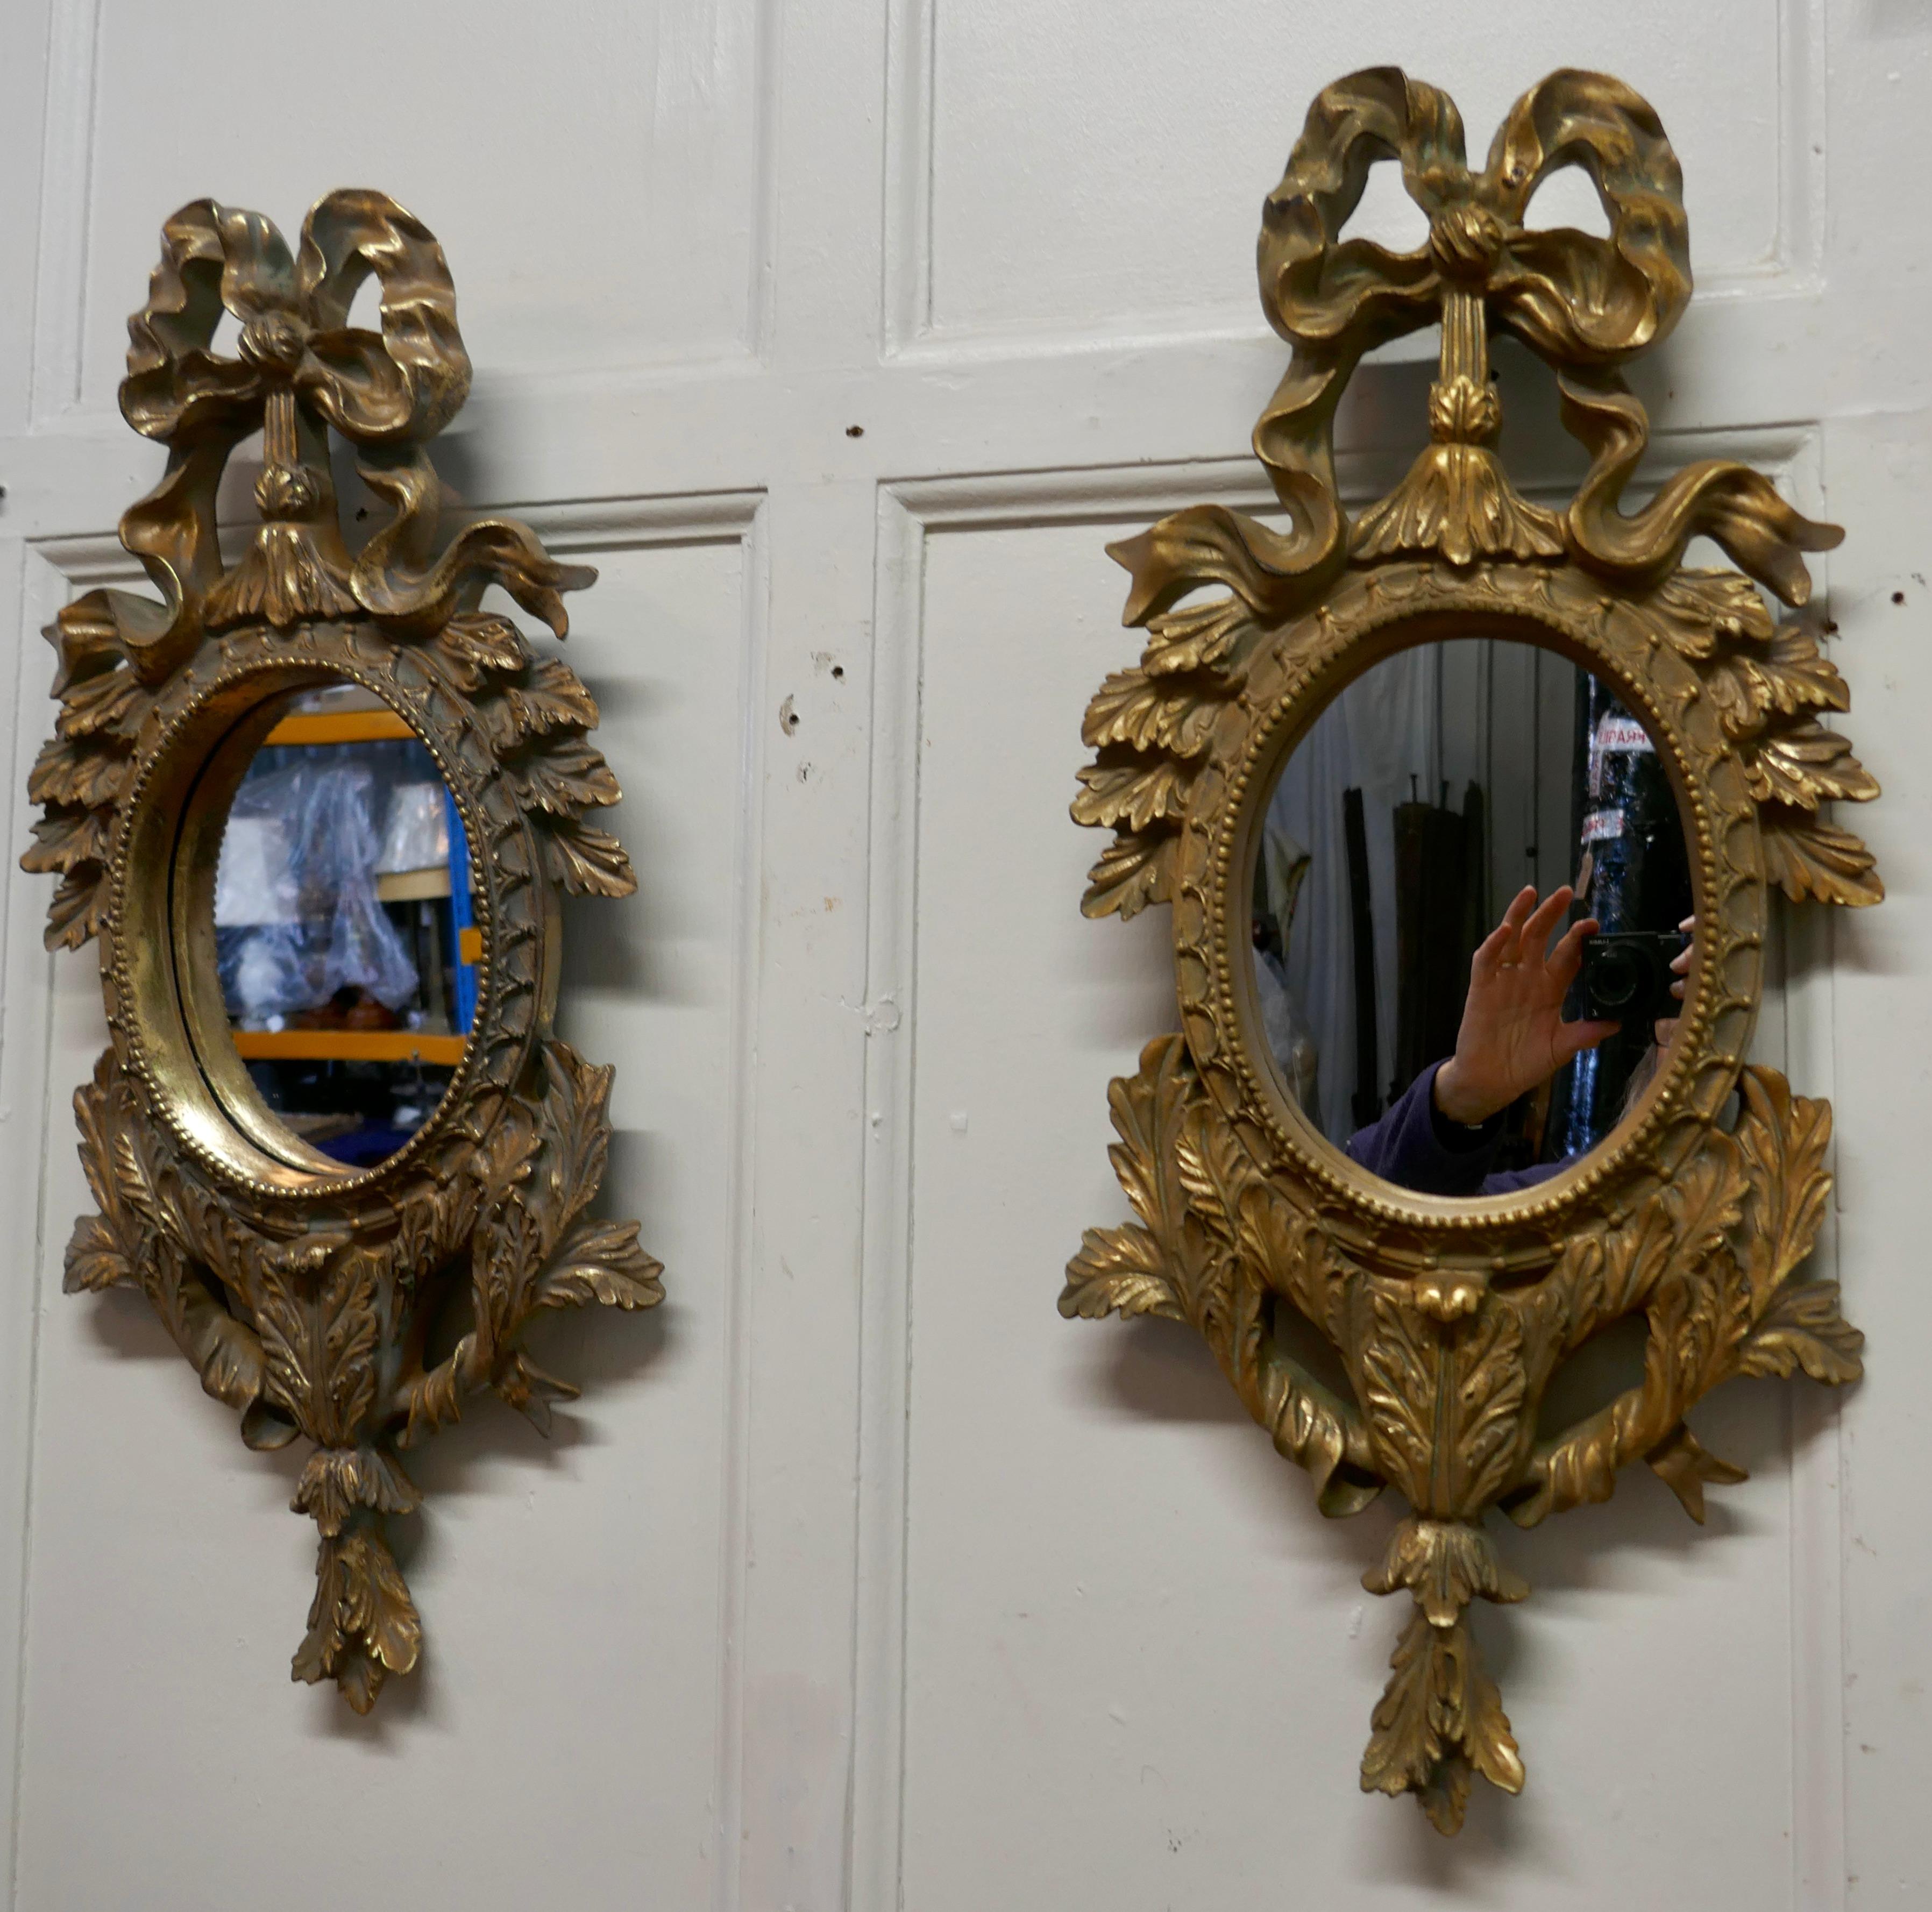 A Pair of Oval Rococo Gilt Wall Mirrors

Each of the Mirrors have an exquisite gilt Frame in the Rococo Style, they have a large Ribbon the top and abundant Acanthus leaf decoration all around 
The mirrors are 12” wide and 26” tall
WD53.